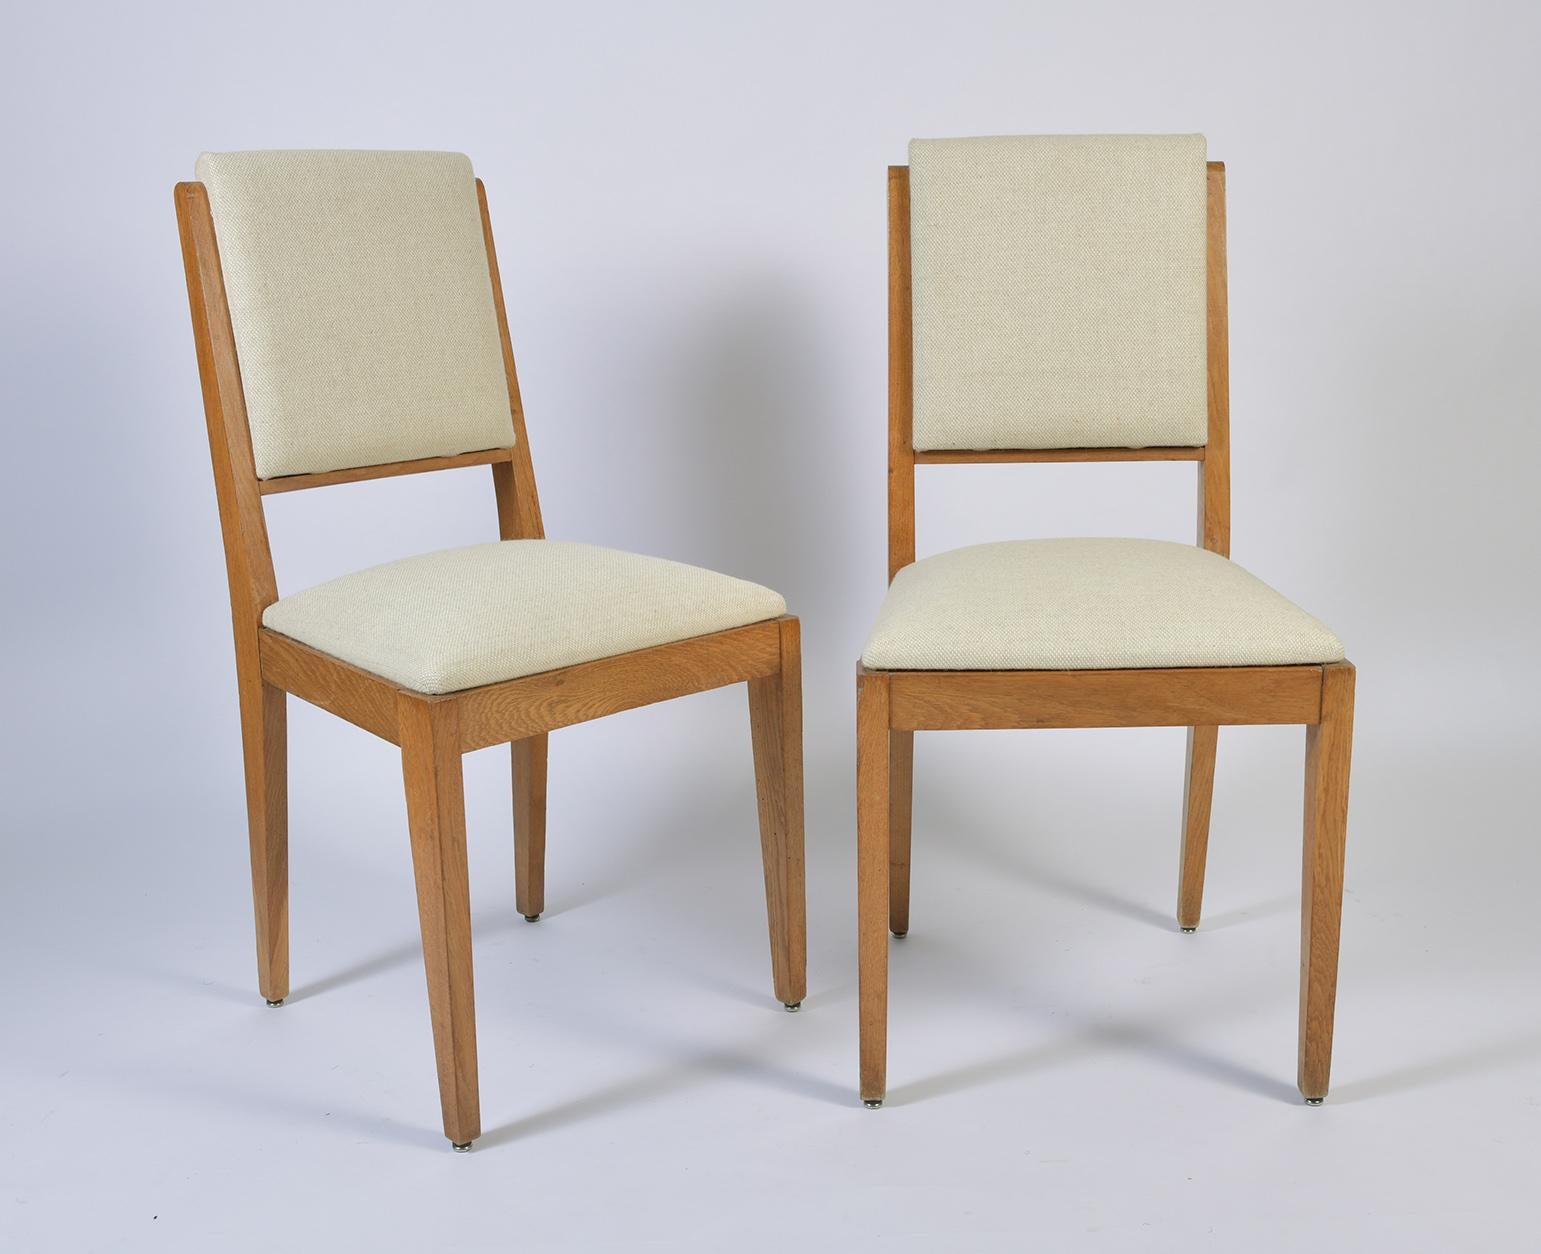 A pair of post-war blond oak chairs
France, circa 1950.
Newly upholstered in high quality tweed from Bute
(in total we have four armchairs and two chairs available).